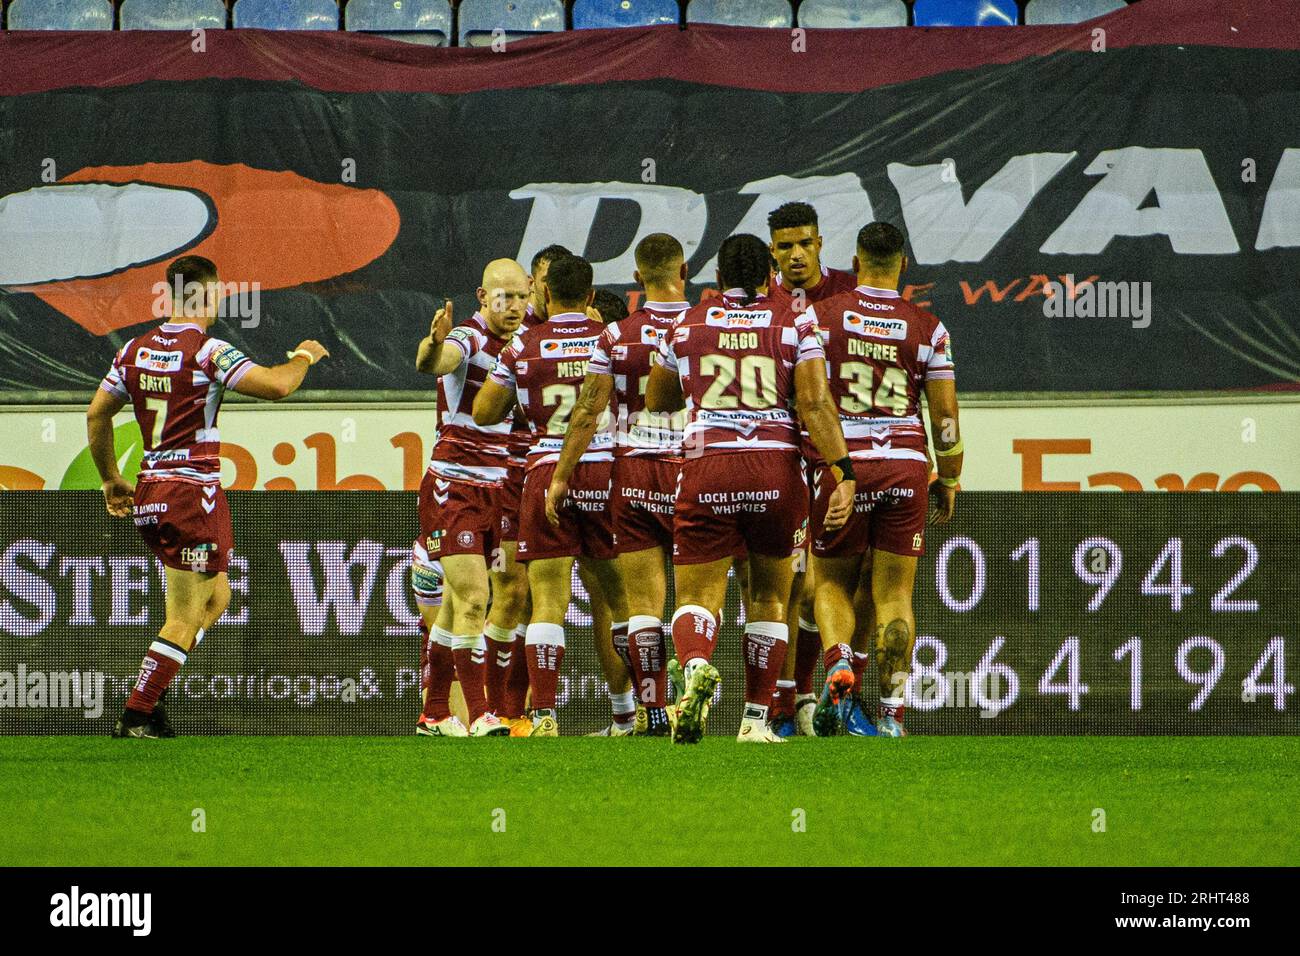 Wigan Warriors celebrate their first try during the BetFred Super League match between Wigan Warriors and Hull Football Club at the DW Stadium, Wigan on Friday 18th August 2023